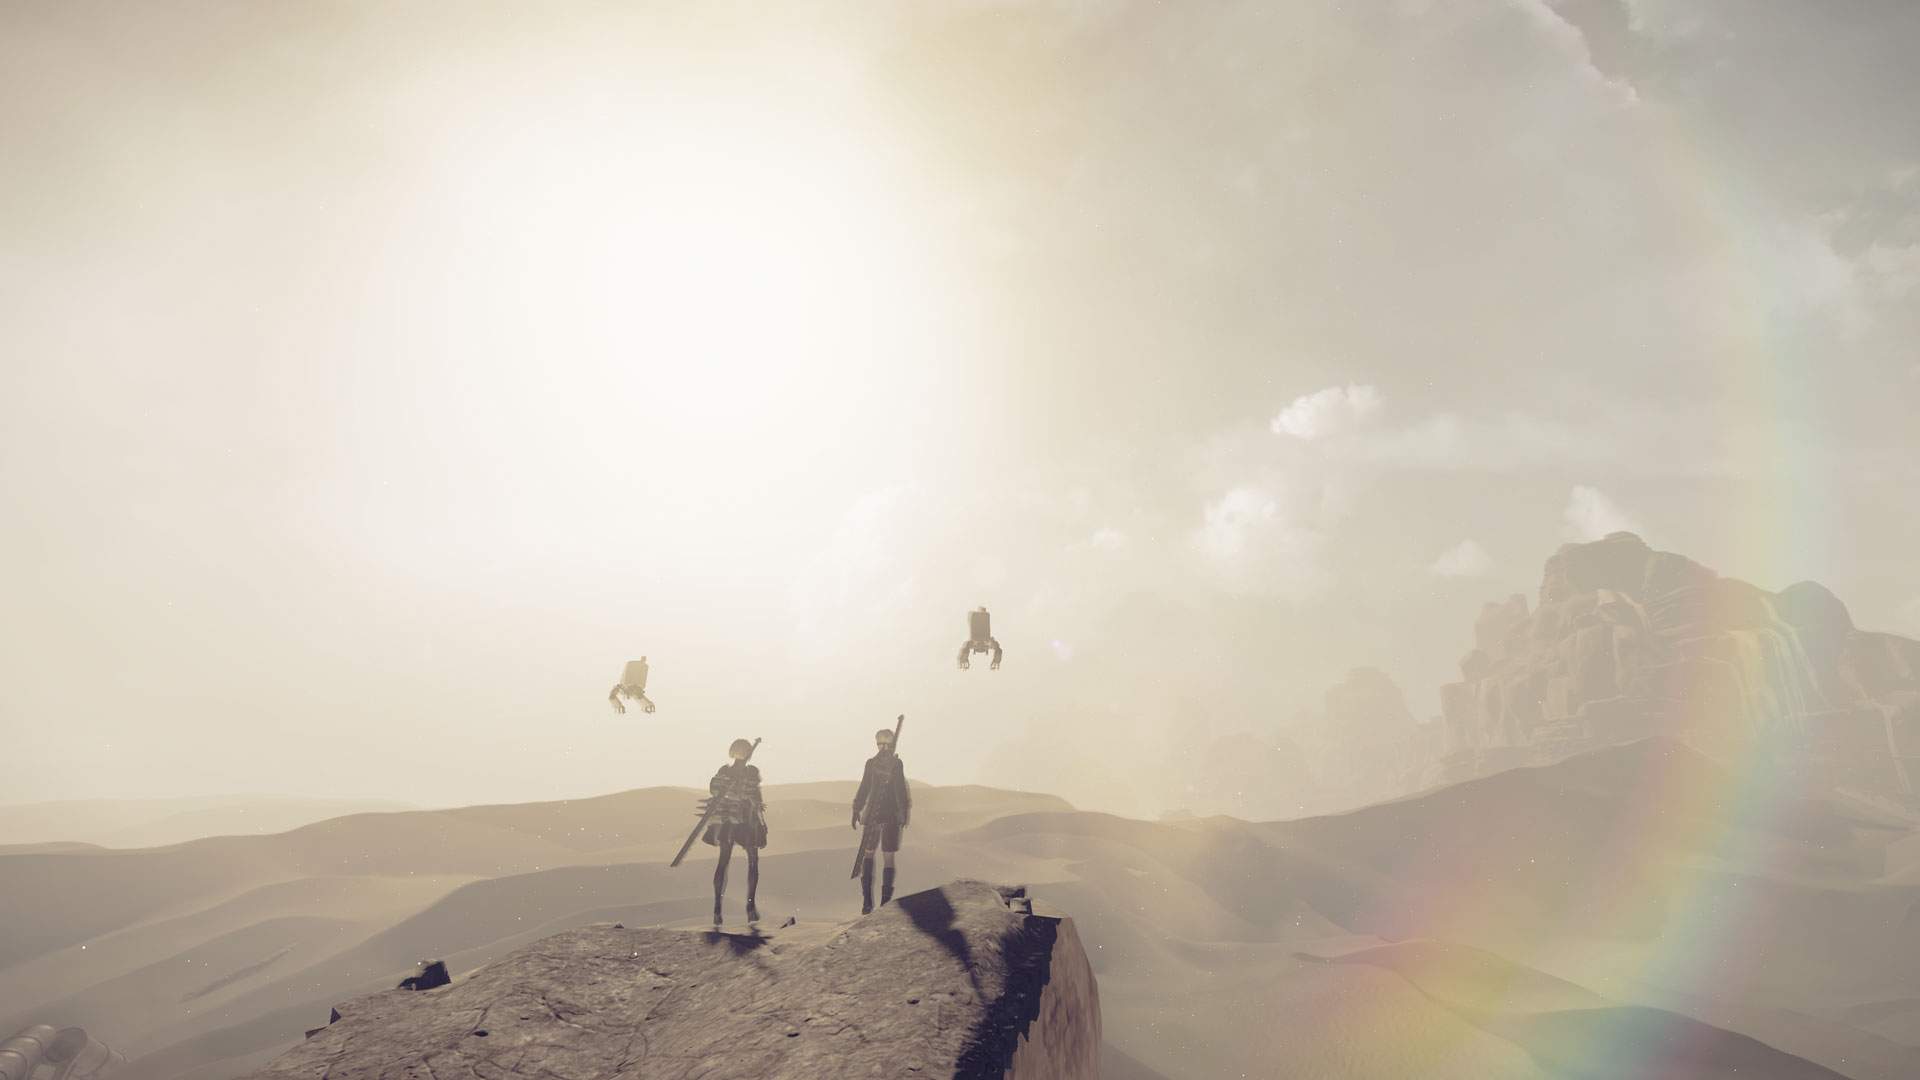 2B and 9S looking out at a vast desert in NieR:Automata